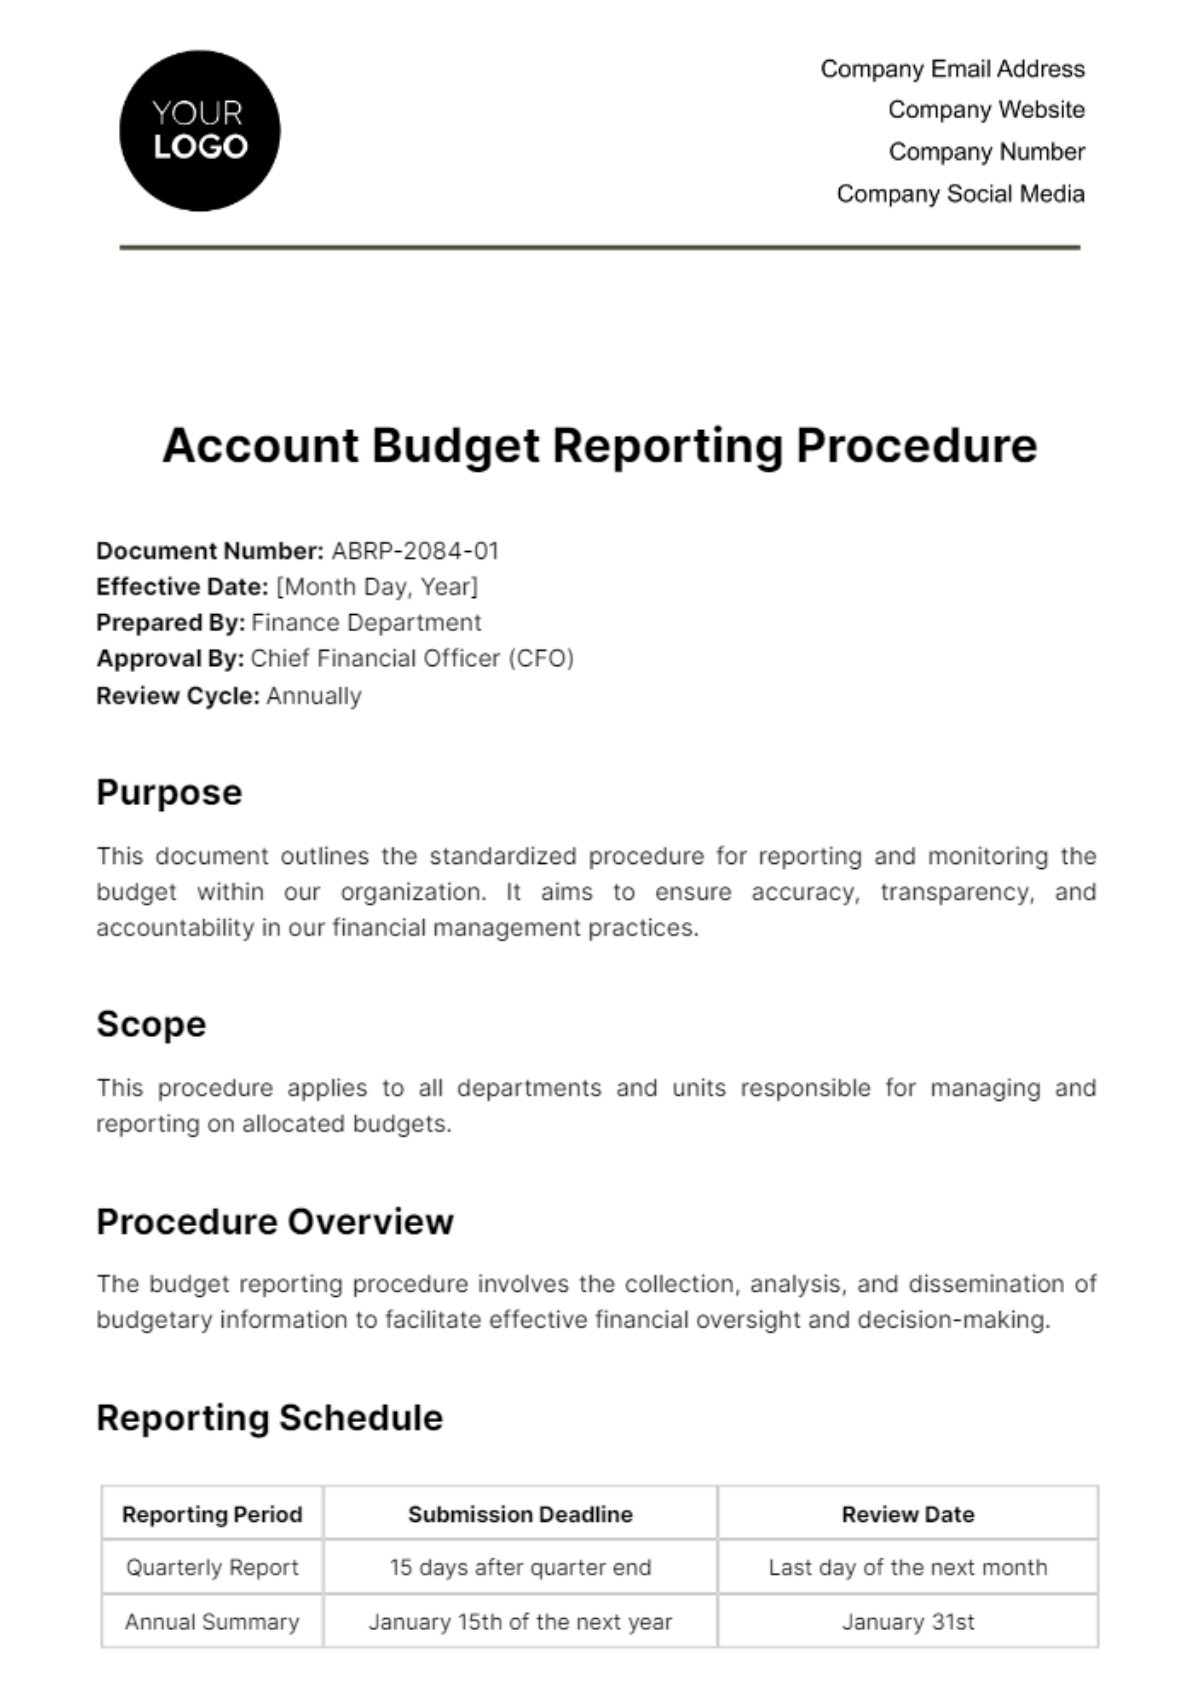 Account Budget Reporting Procedure Template